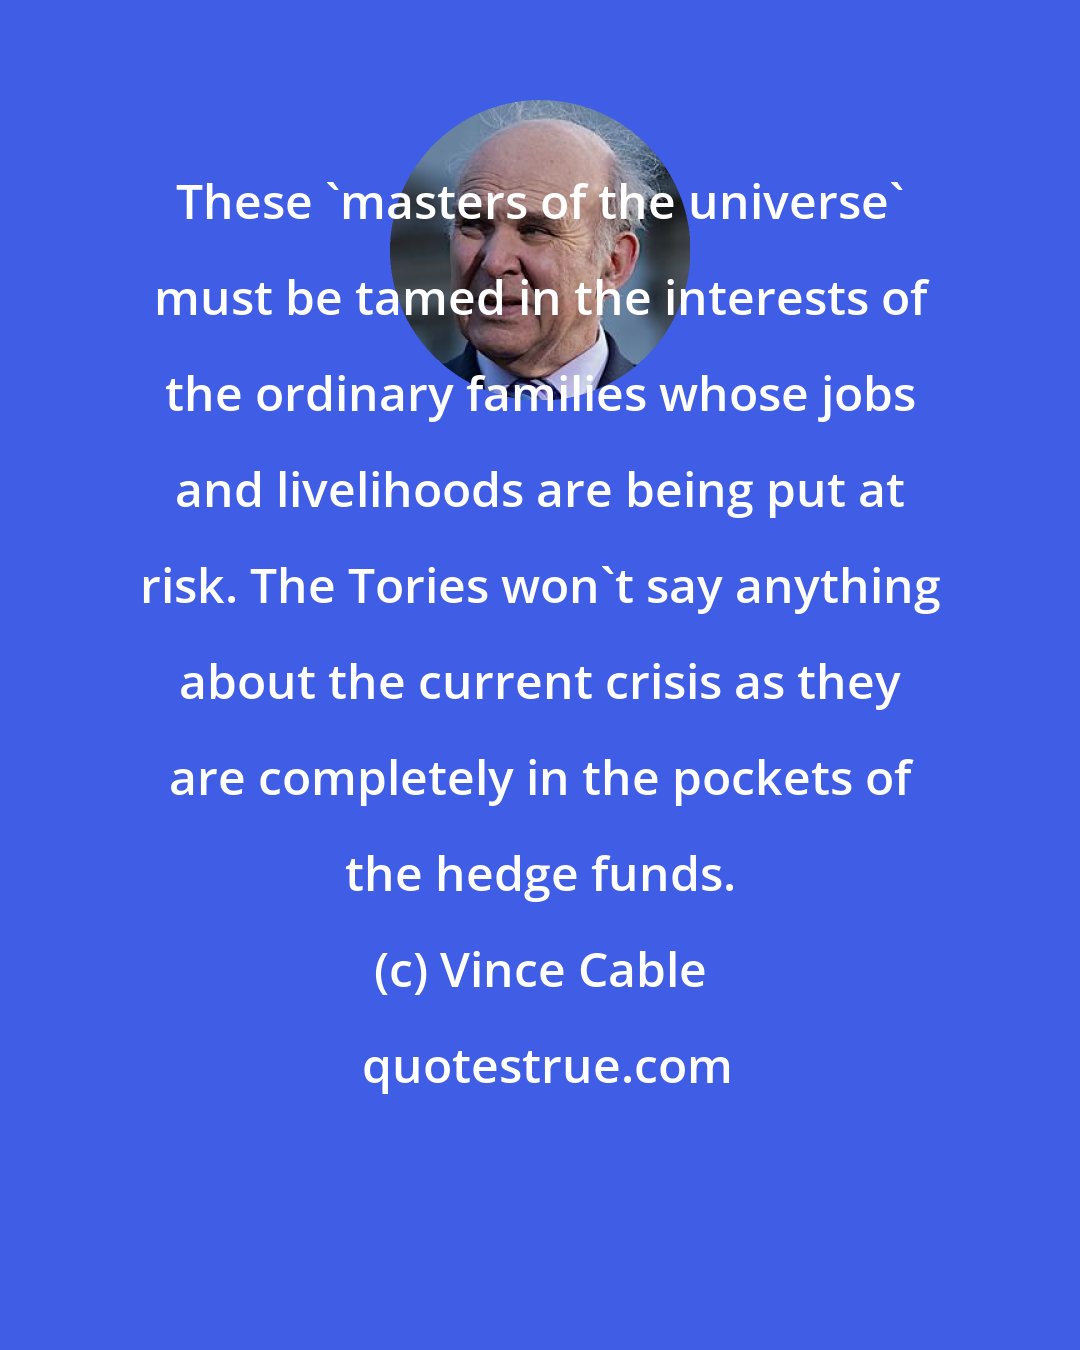 Vince Cable: These 'masters of the universe' must be tamed in the interests of the ordinary families whose jobs and livelihoods are being put at risk. The Tories won't say anything about the current crisis as they are completely in the pockets of the hedge funds.